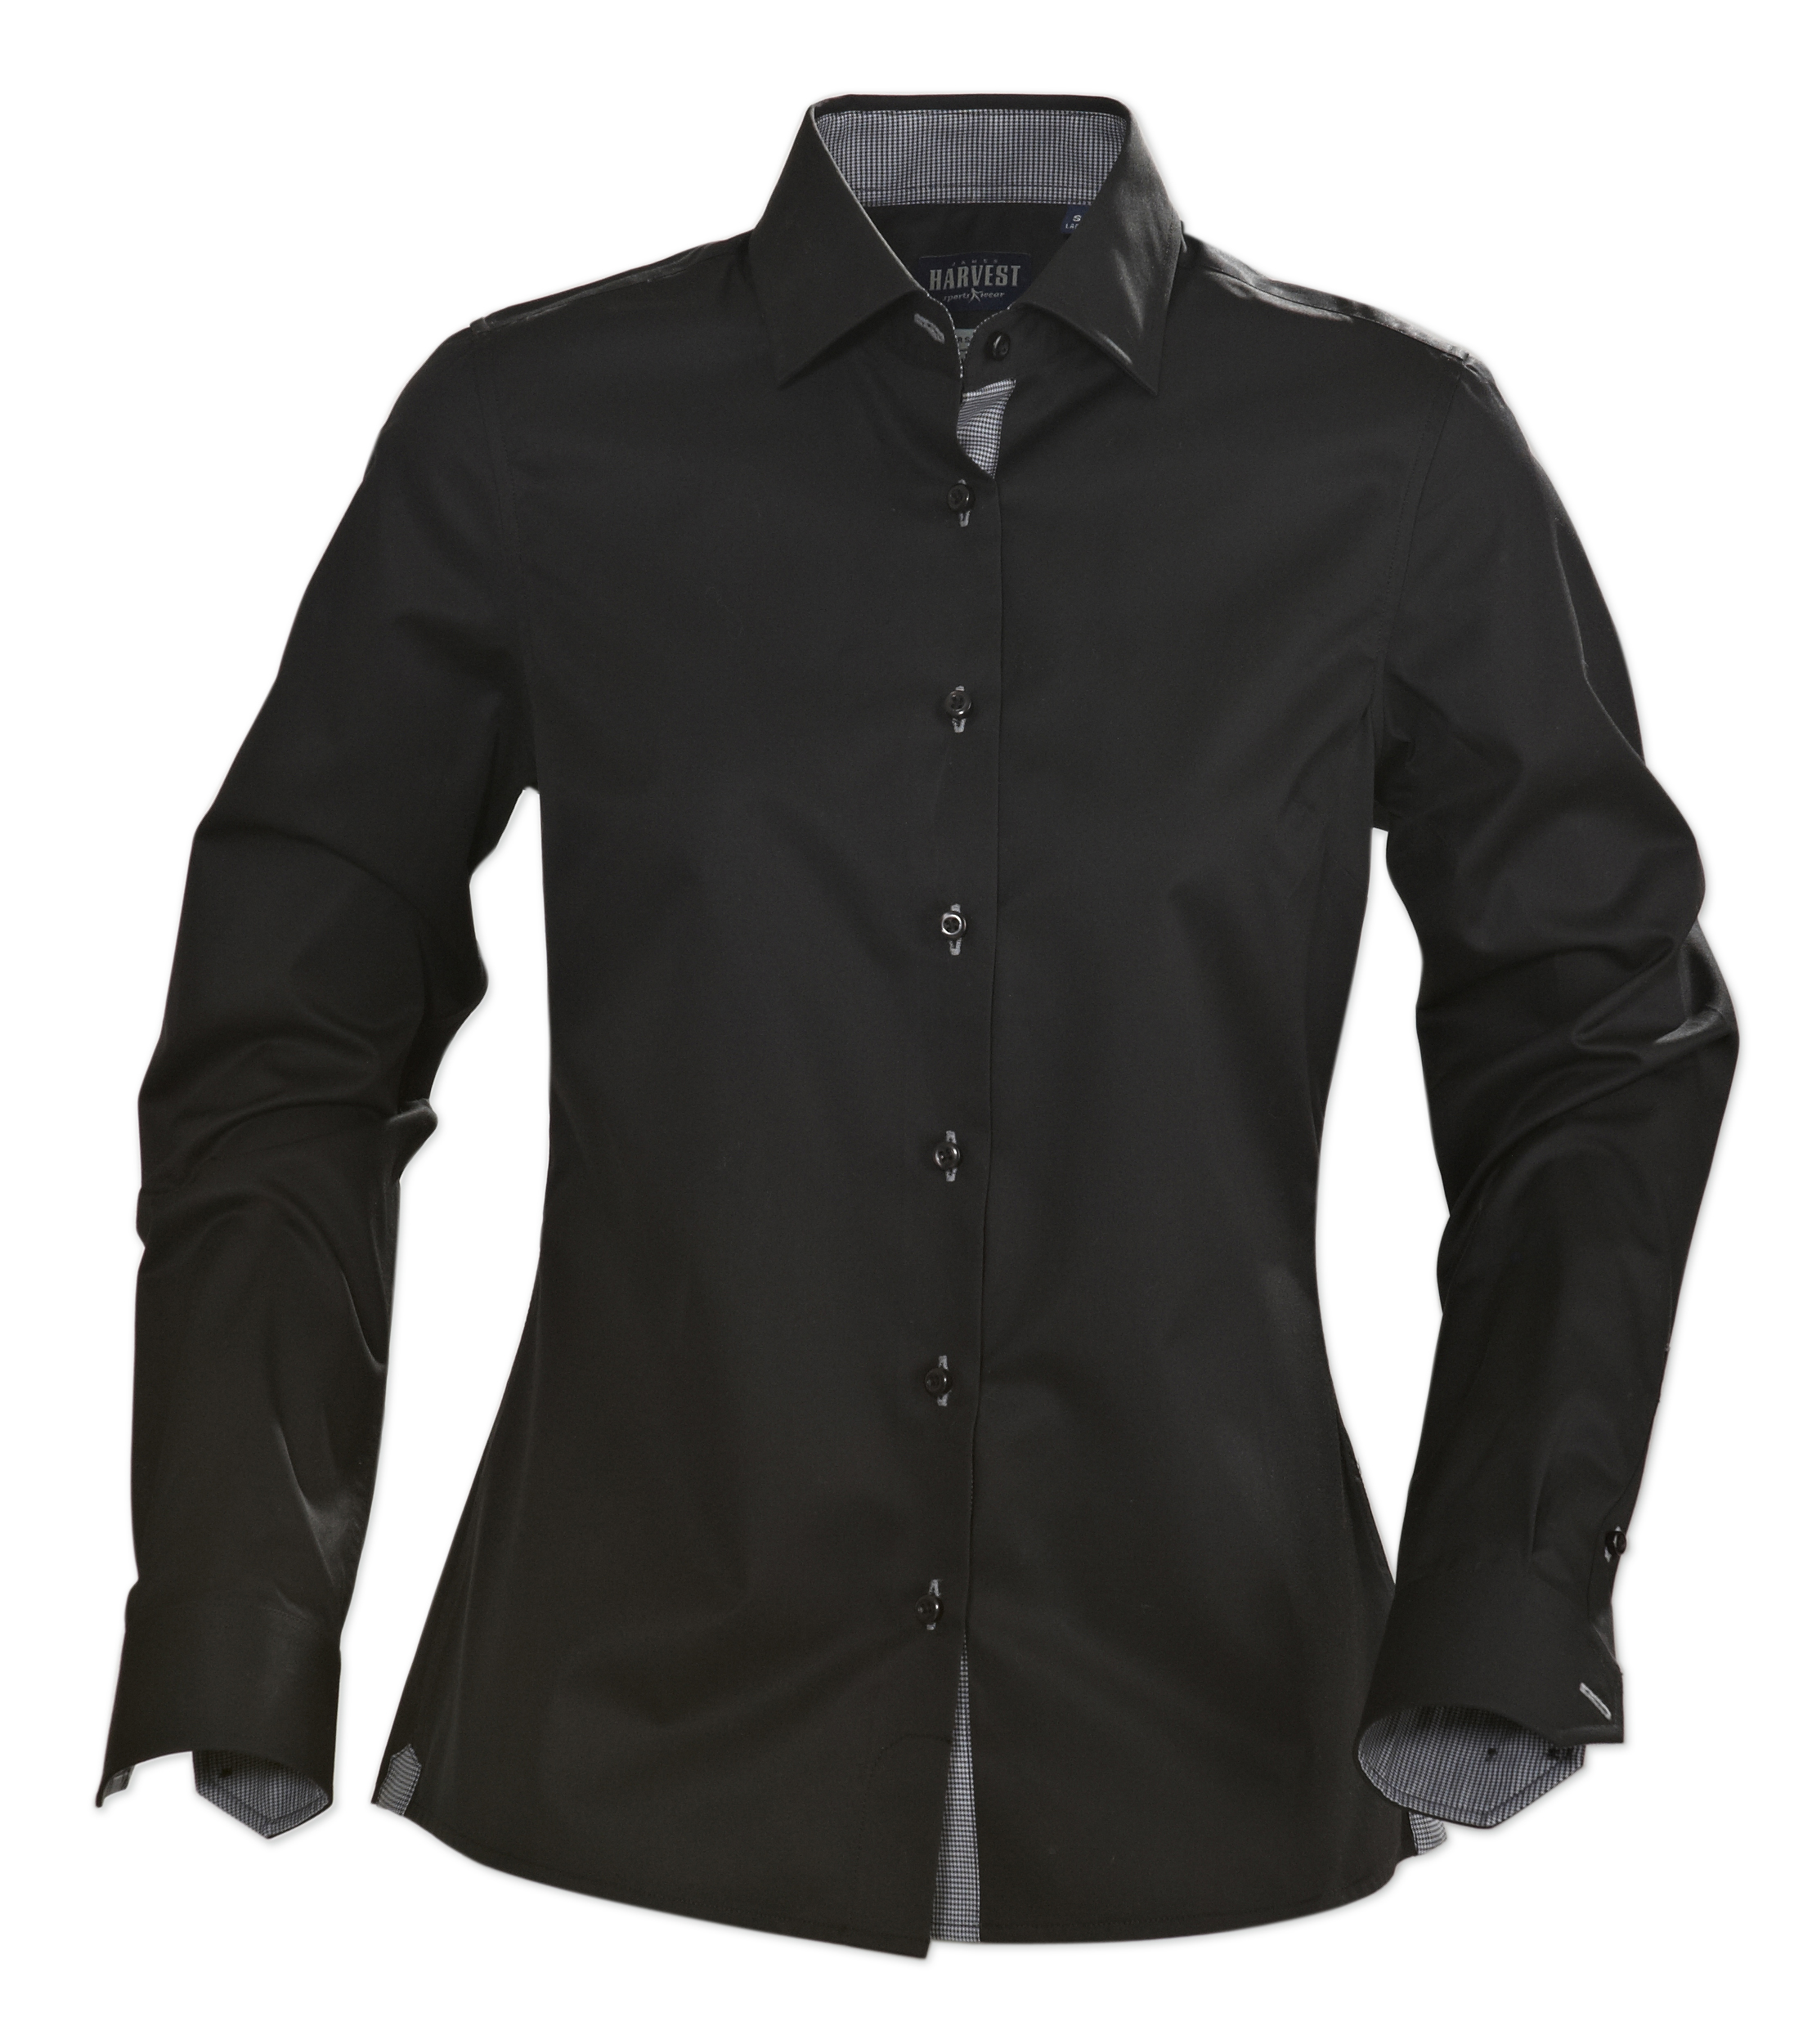 Baltimore Ladies - Business Shirts - A1 Promotional Products